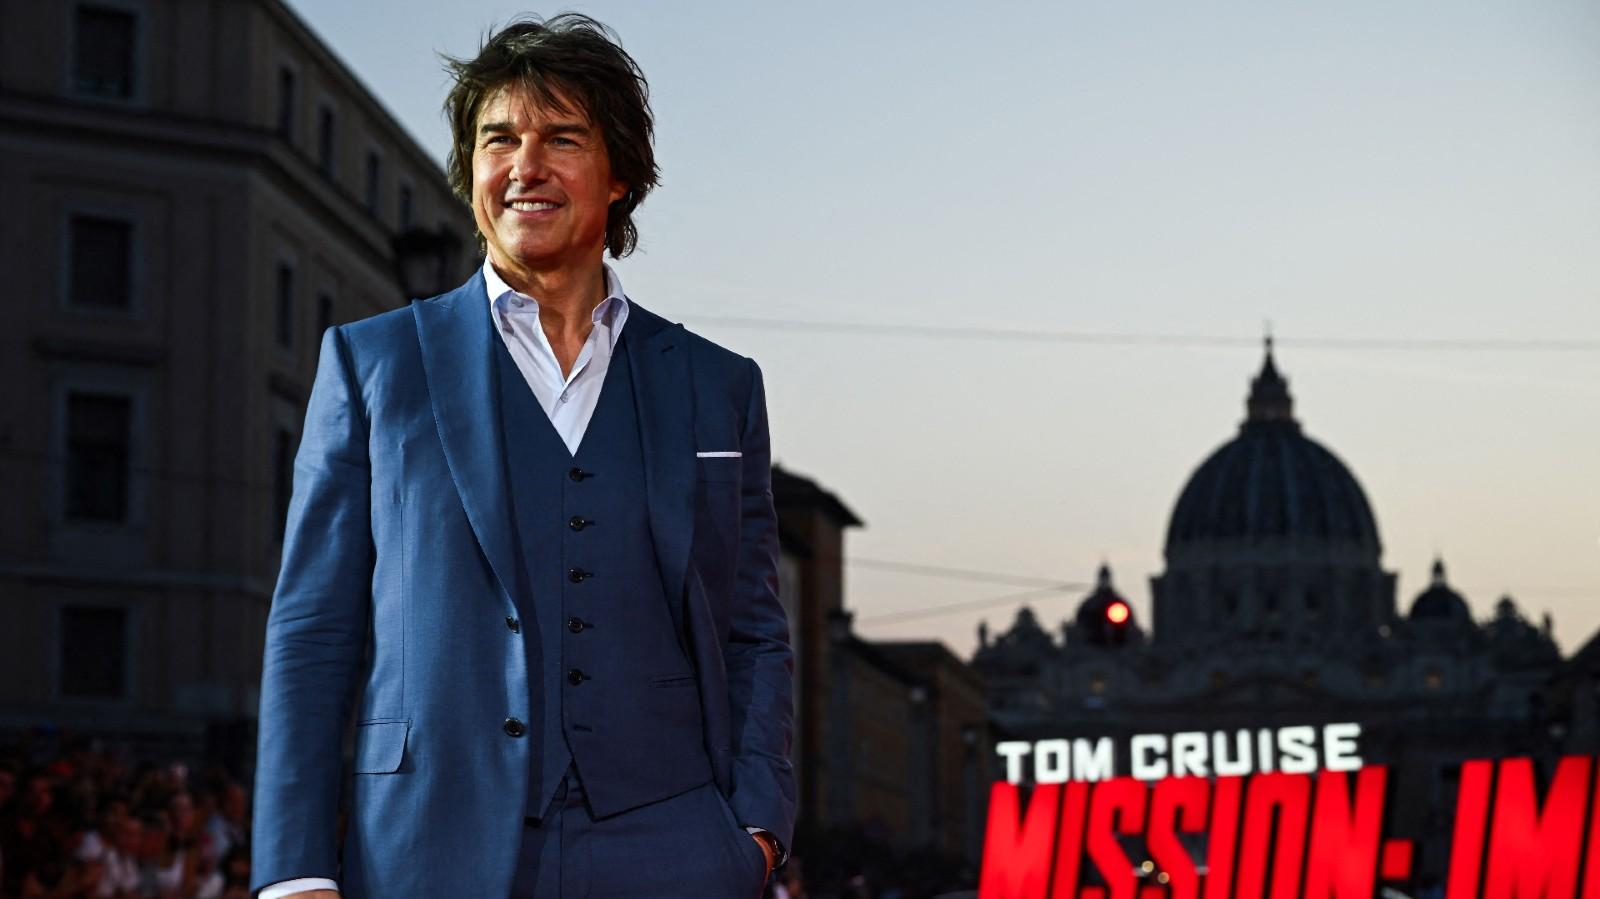 Tom Cruise Thanks Rome For Helping Make Mission Impossible